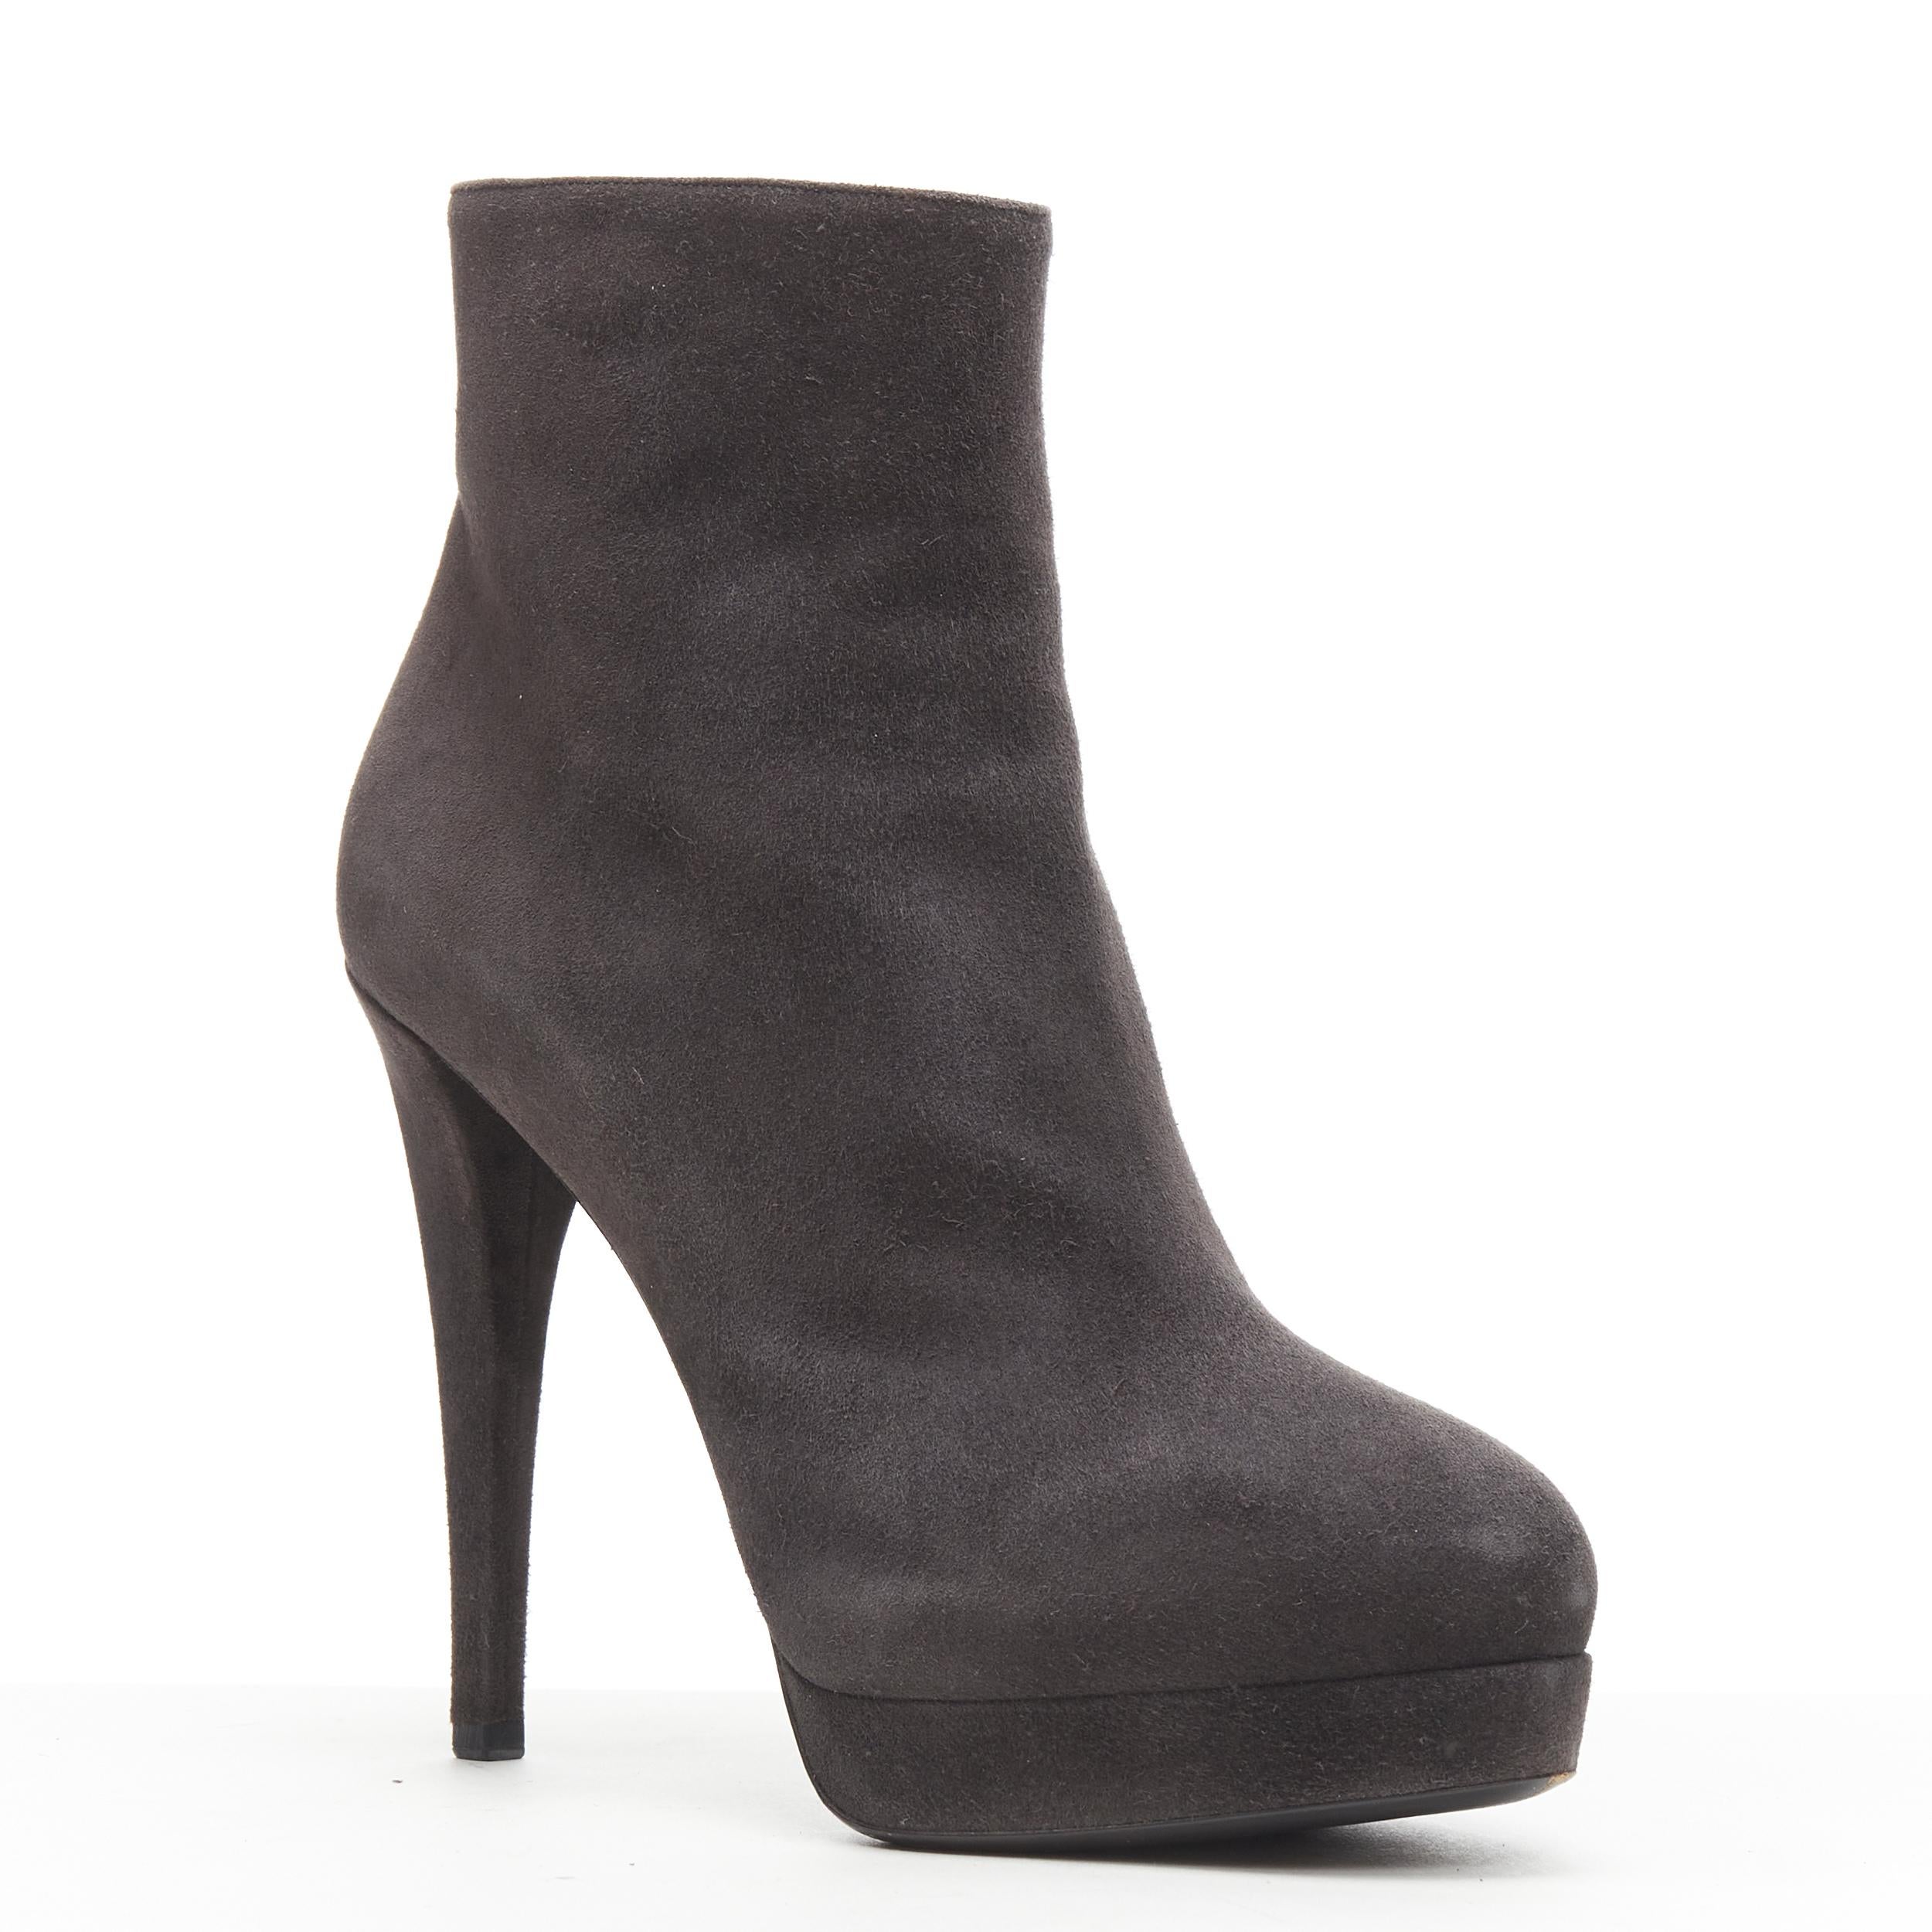 YVES SAINT LAURENT dark grey suede almond toe platform ankle bootie EU37.5 
Reference: GIYG/A00111 
Brand: Yves Saint Laurent 
Material: Suede 
Color: Grey
Pattern: Solid 
Closure: Zip 
Extra Detail: Platform bootie. 
Made in: Italy 


CONDITION: